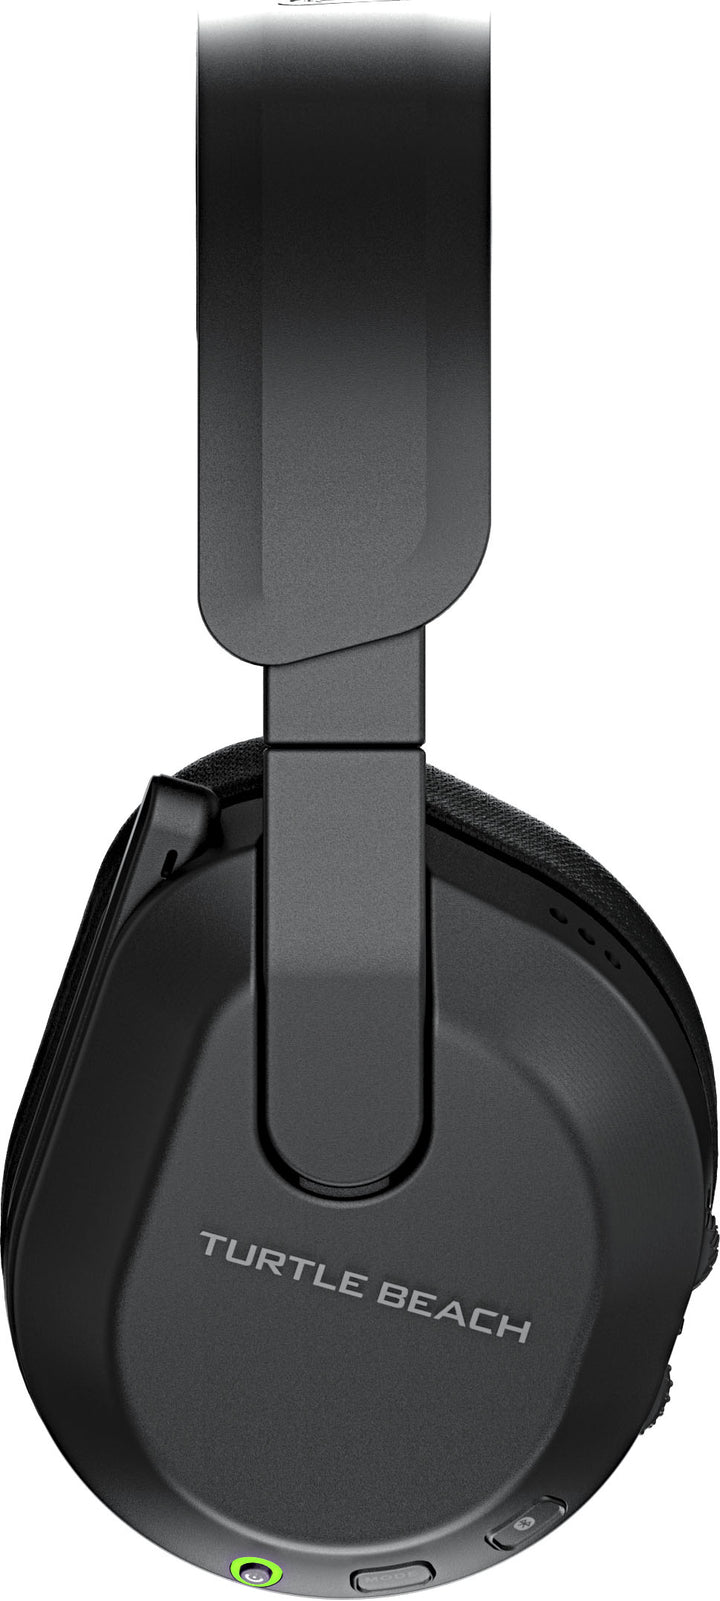 Turtle Beach Stealth 600 Wireless Gaming Headset for Xbox Series X|S, PC, PS5, PS4, Nintendo Switch with 80-Hr Battery - Black_5